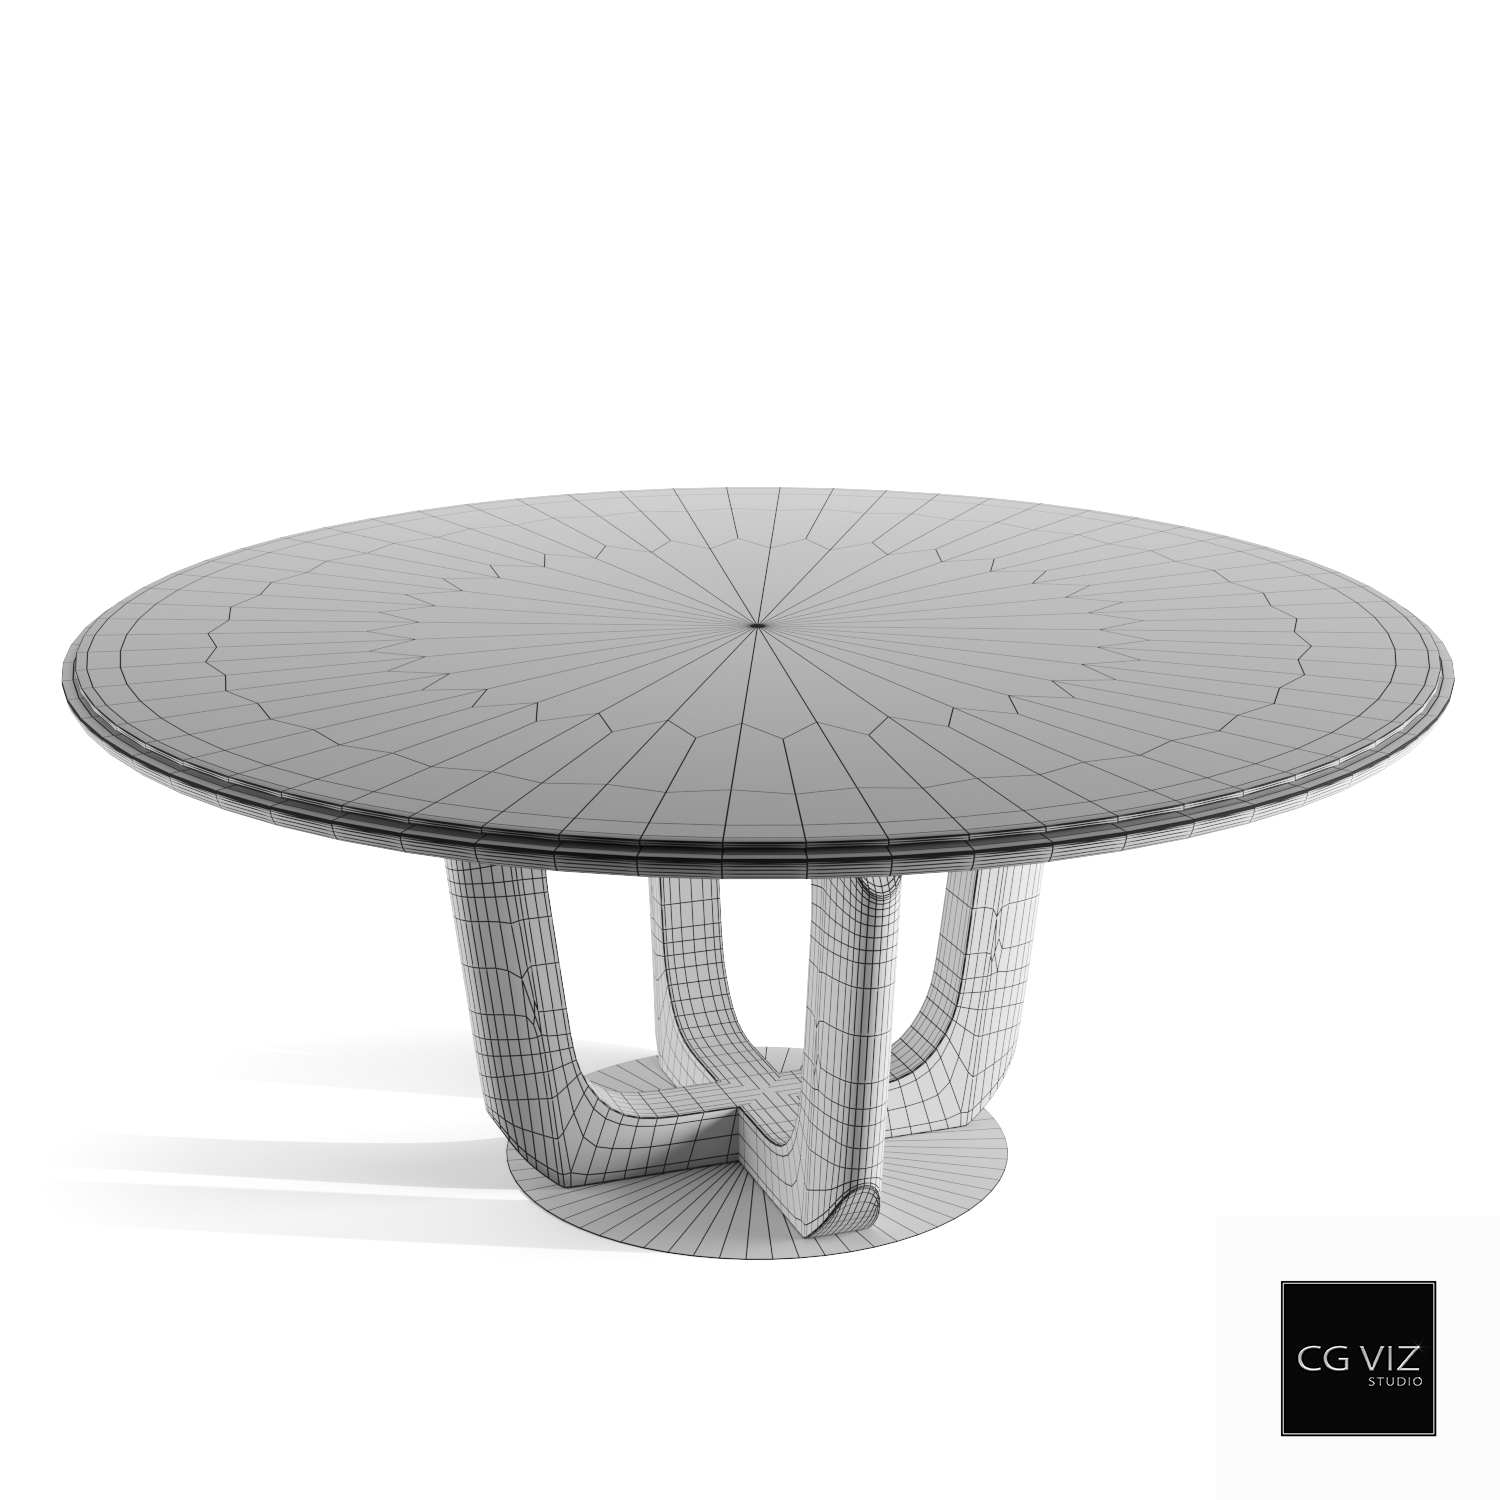 Wireframe View of Fortune II-4221/8 Dining Table by CG Viz Studio